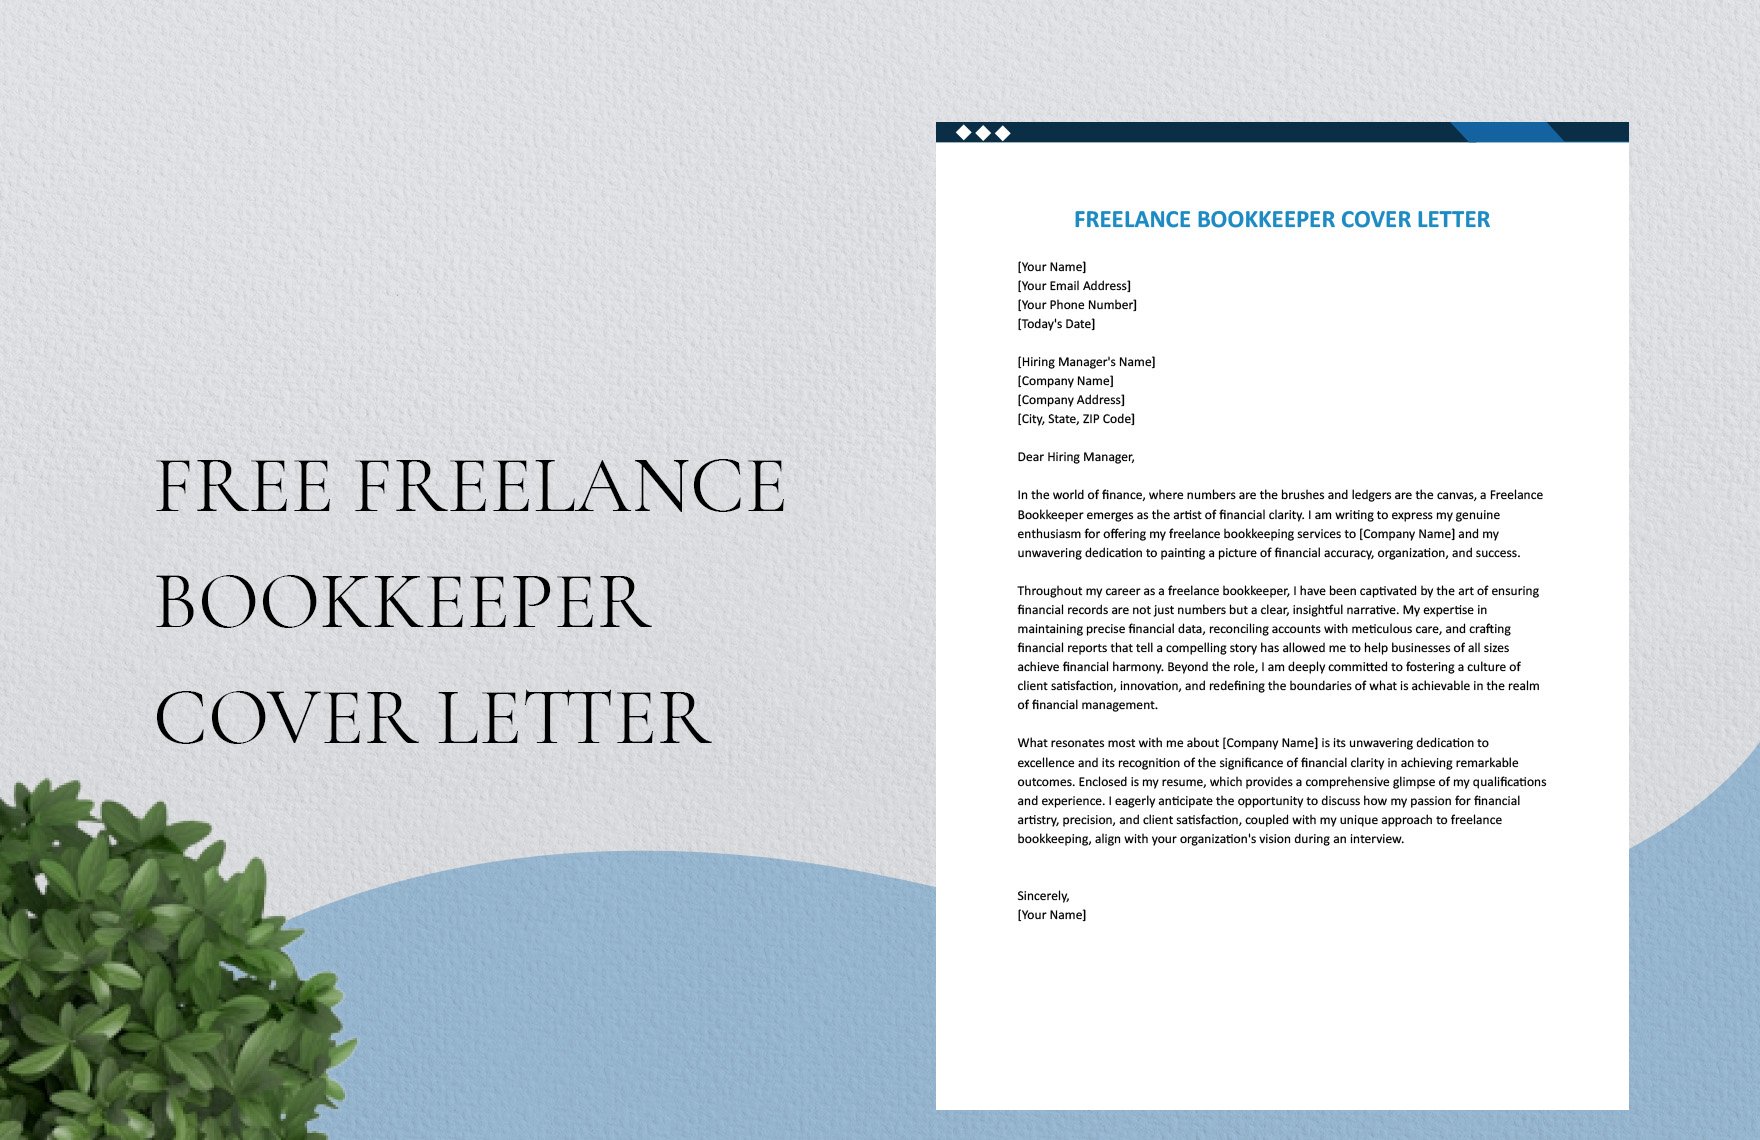 Freelance Bookkeeper Cover Letter in Word, Google Docs